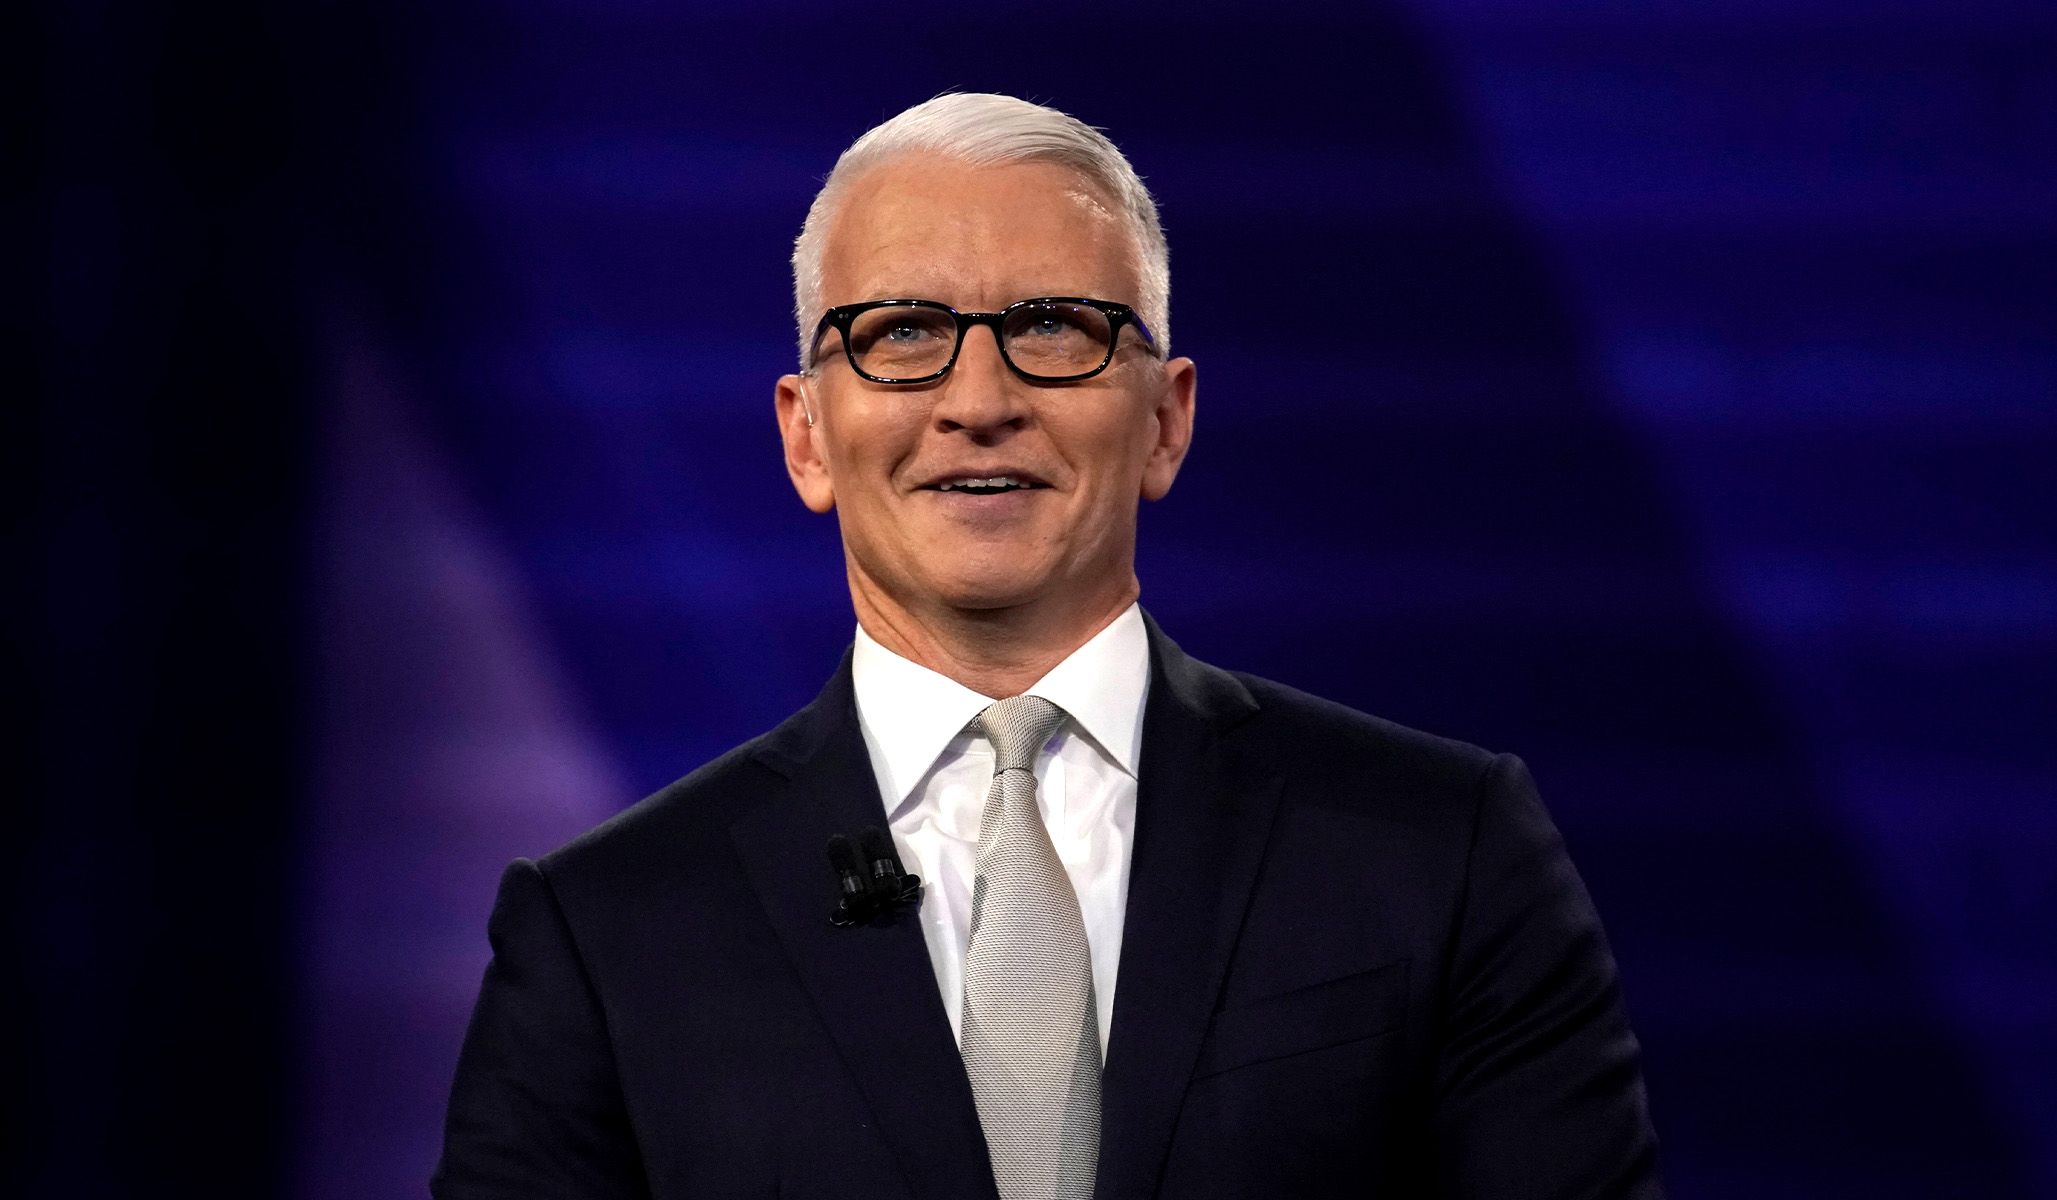 Anderson Cooper Asks Viewers to Understand CNN Actually Covers News Now